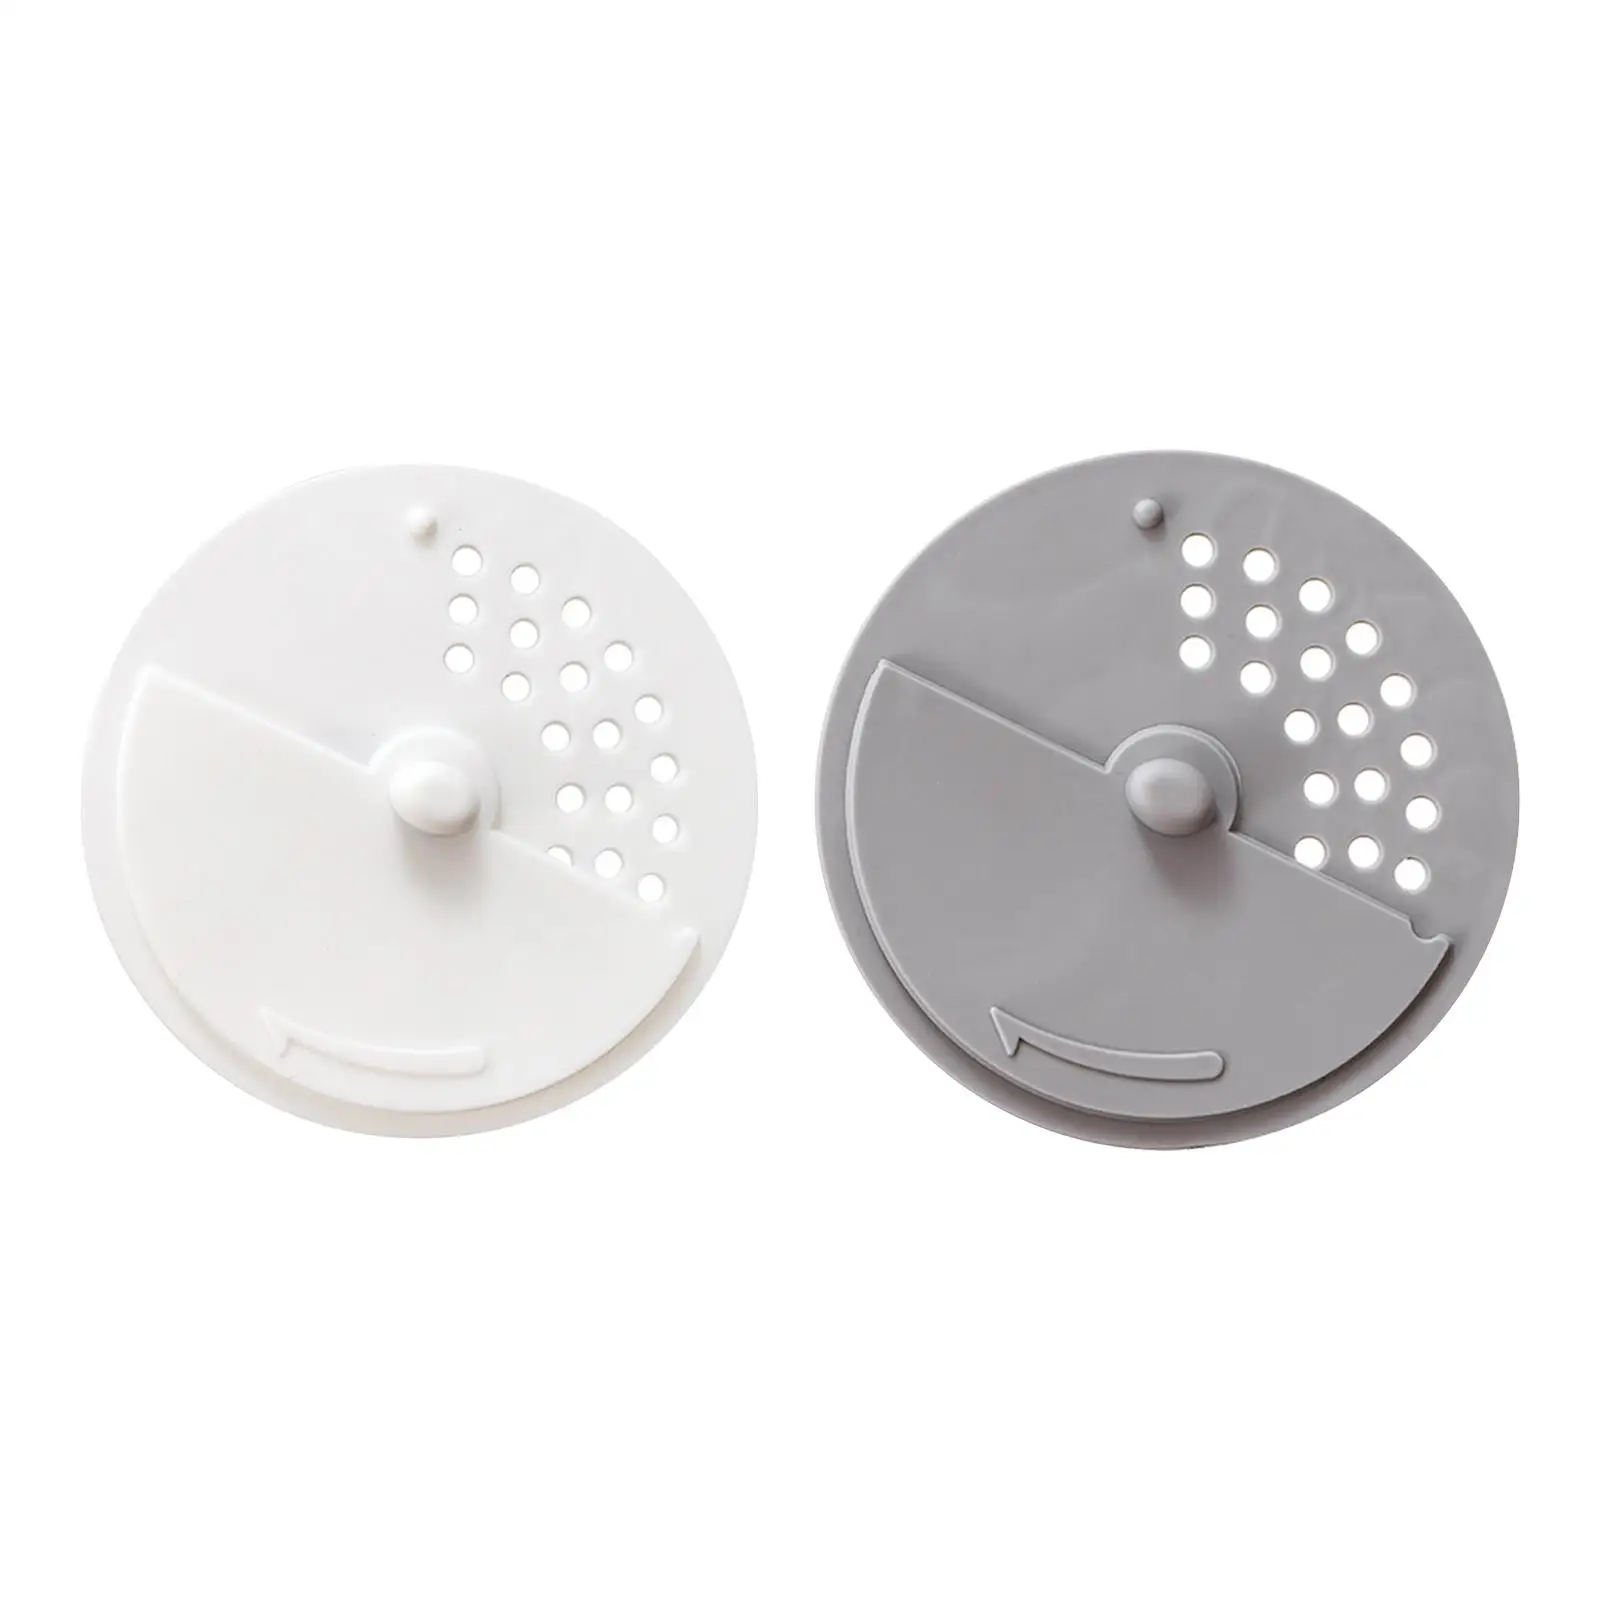 Silicone Floor Drain Cover Practical Anti Blocking for Kitchen Restroom